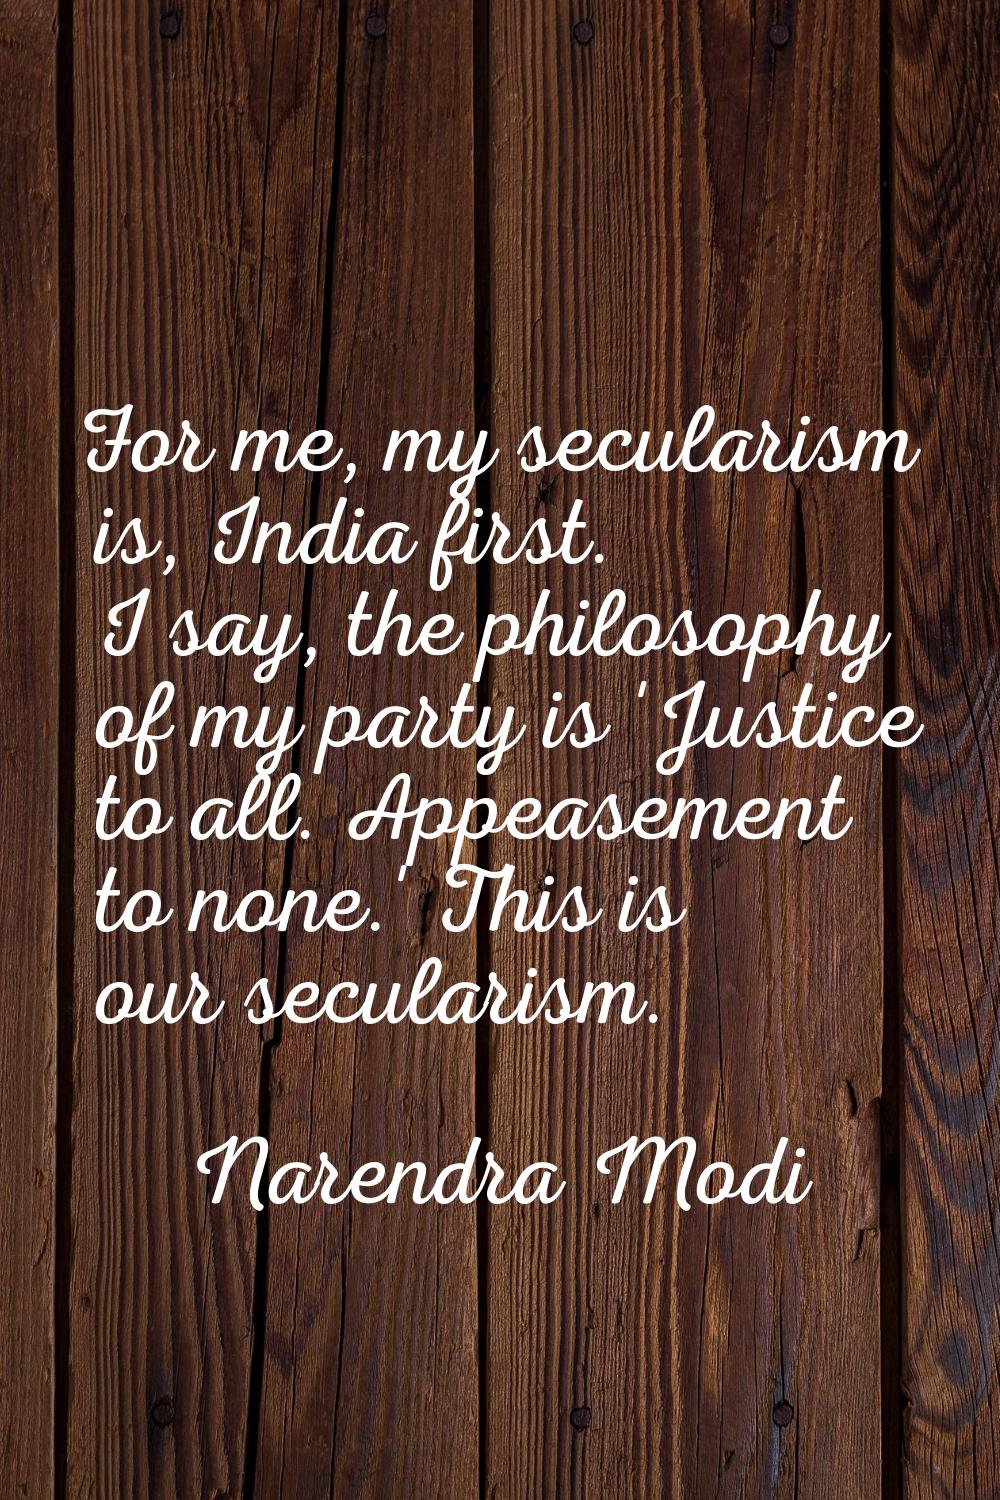 For me, my secularism is, India first. I say, the philosophy of my party is 'Justice to all. Appeas